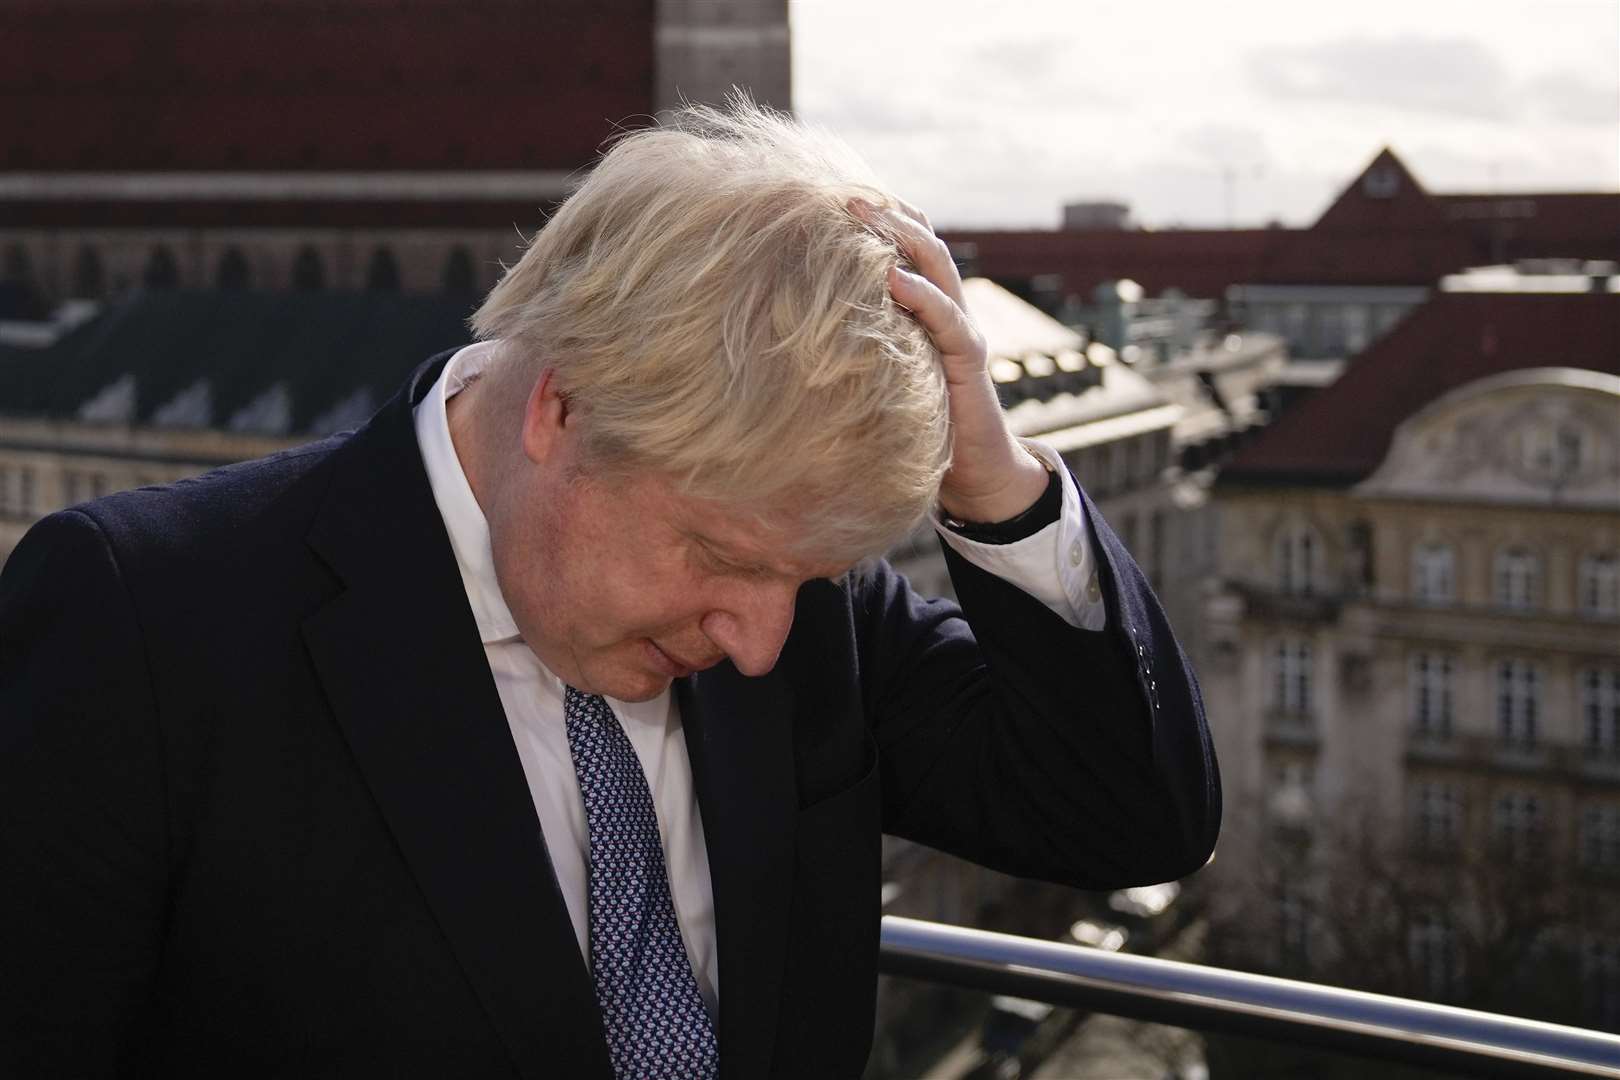 Prime Minister Boris Johnson rubbing his hair to get ready for a interview during the Munich Security Conference in Germany (Matt Dunham/PA)